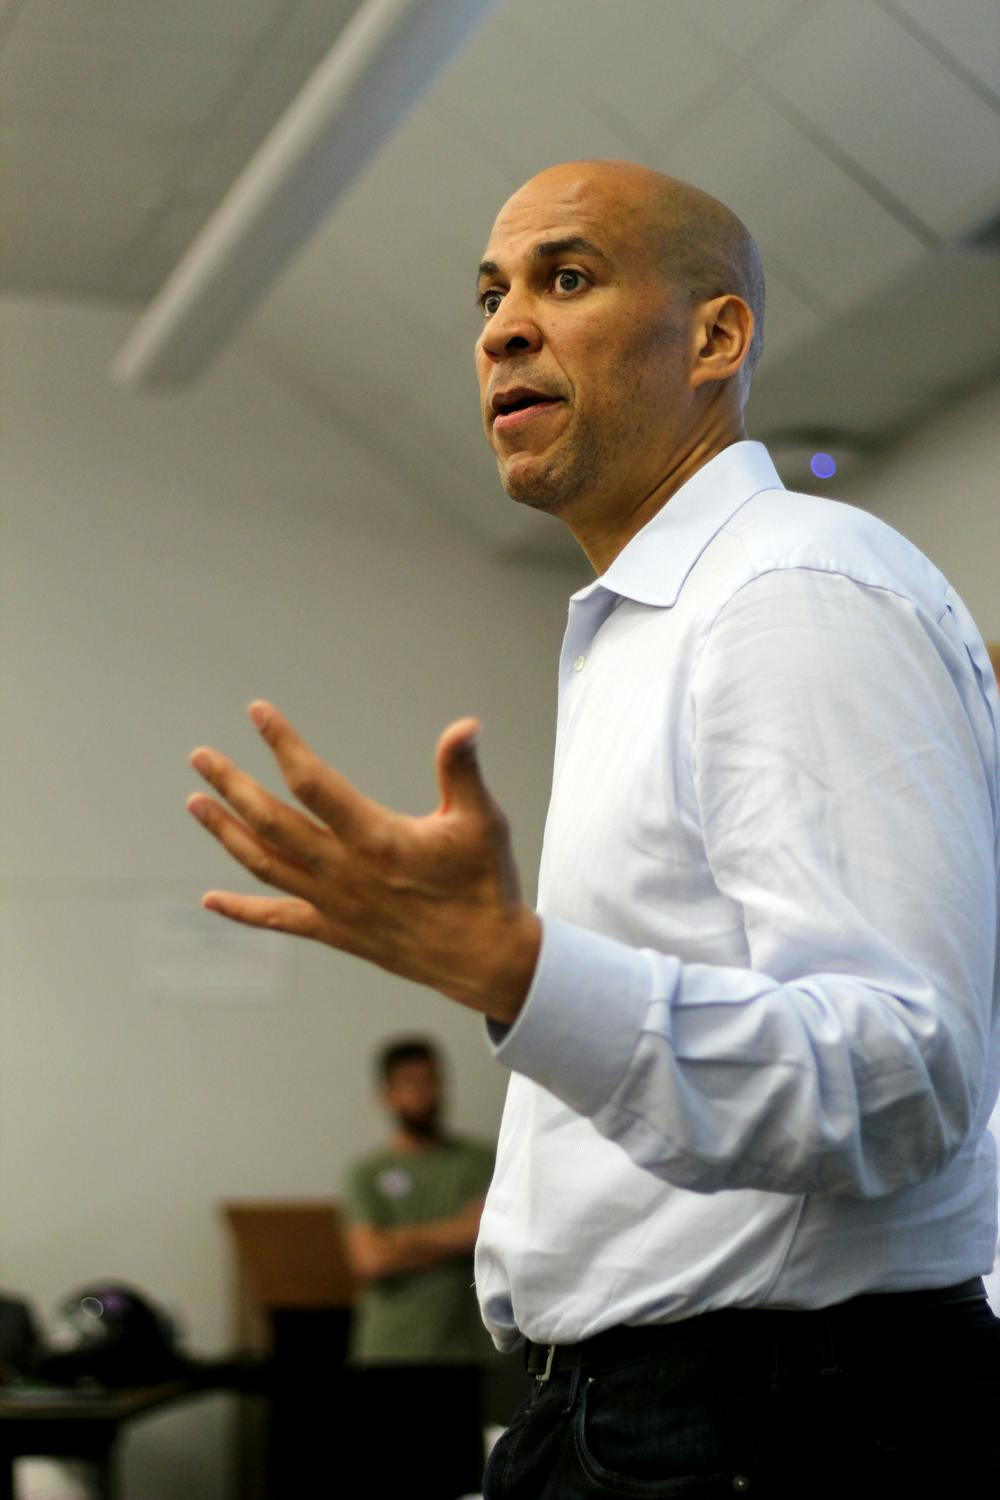 <p><span id="docs-internal-guid-c0059ef4-7fff-e7a2-4306-b9d80fb504af"><span>New Jersey Senator Cory Booker joins Senator Bill Nelson at a UF College Democrats meeting on Oct. 19 at Weil Hall. Students asked them questions about policies and their thoughts on current issues in the Senate.</span></span></p>